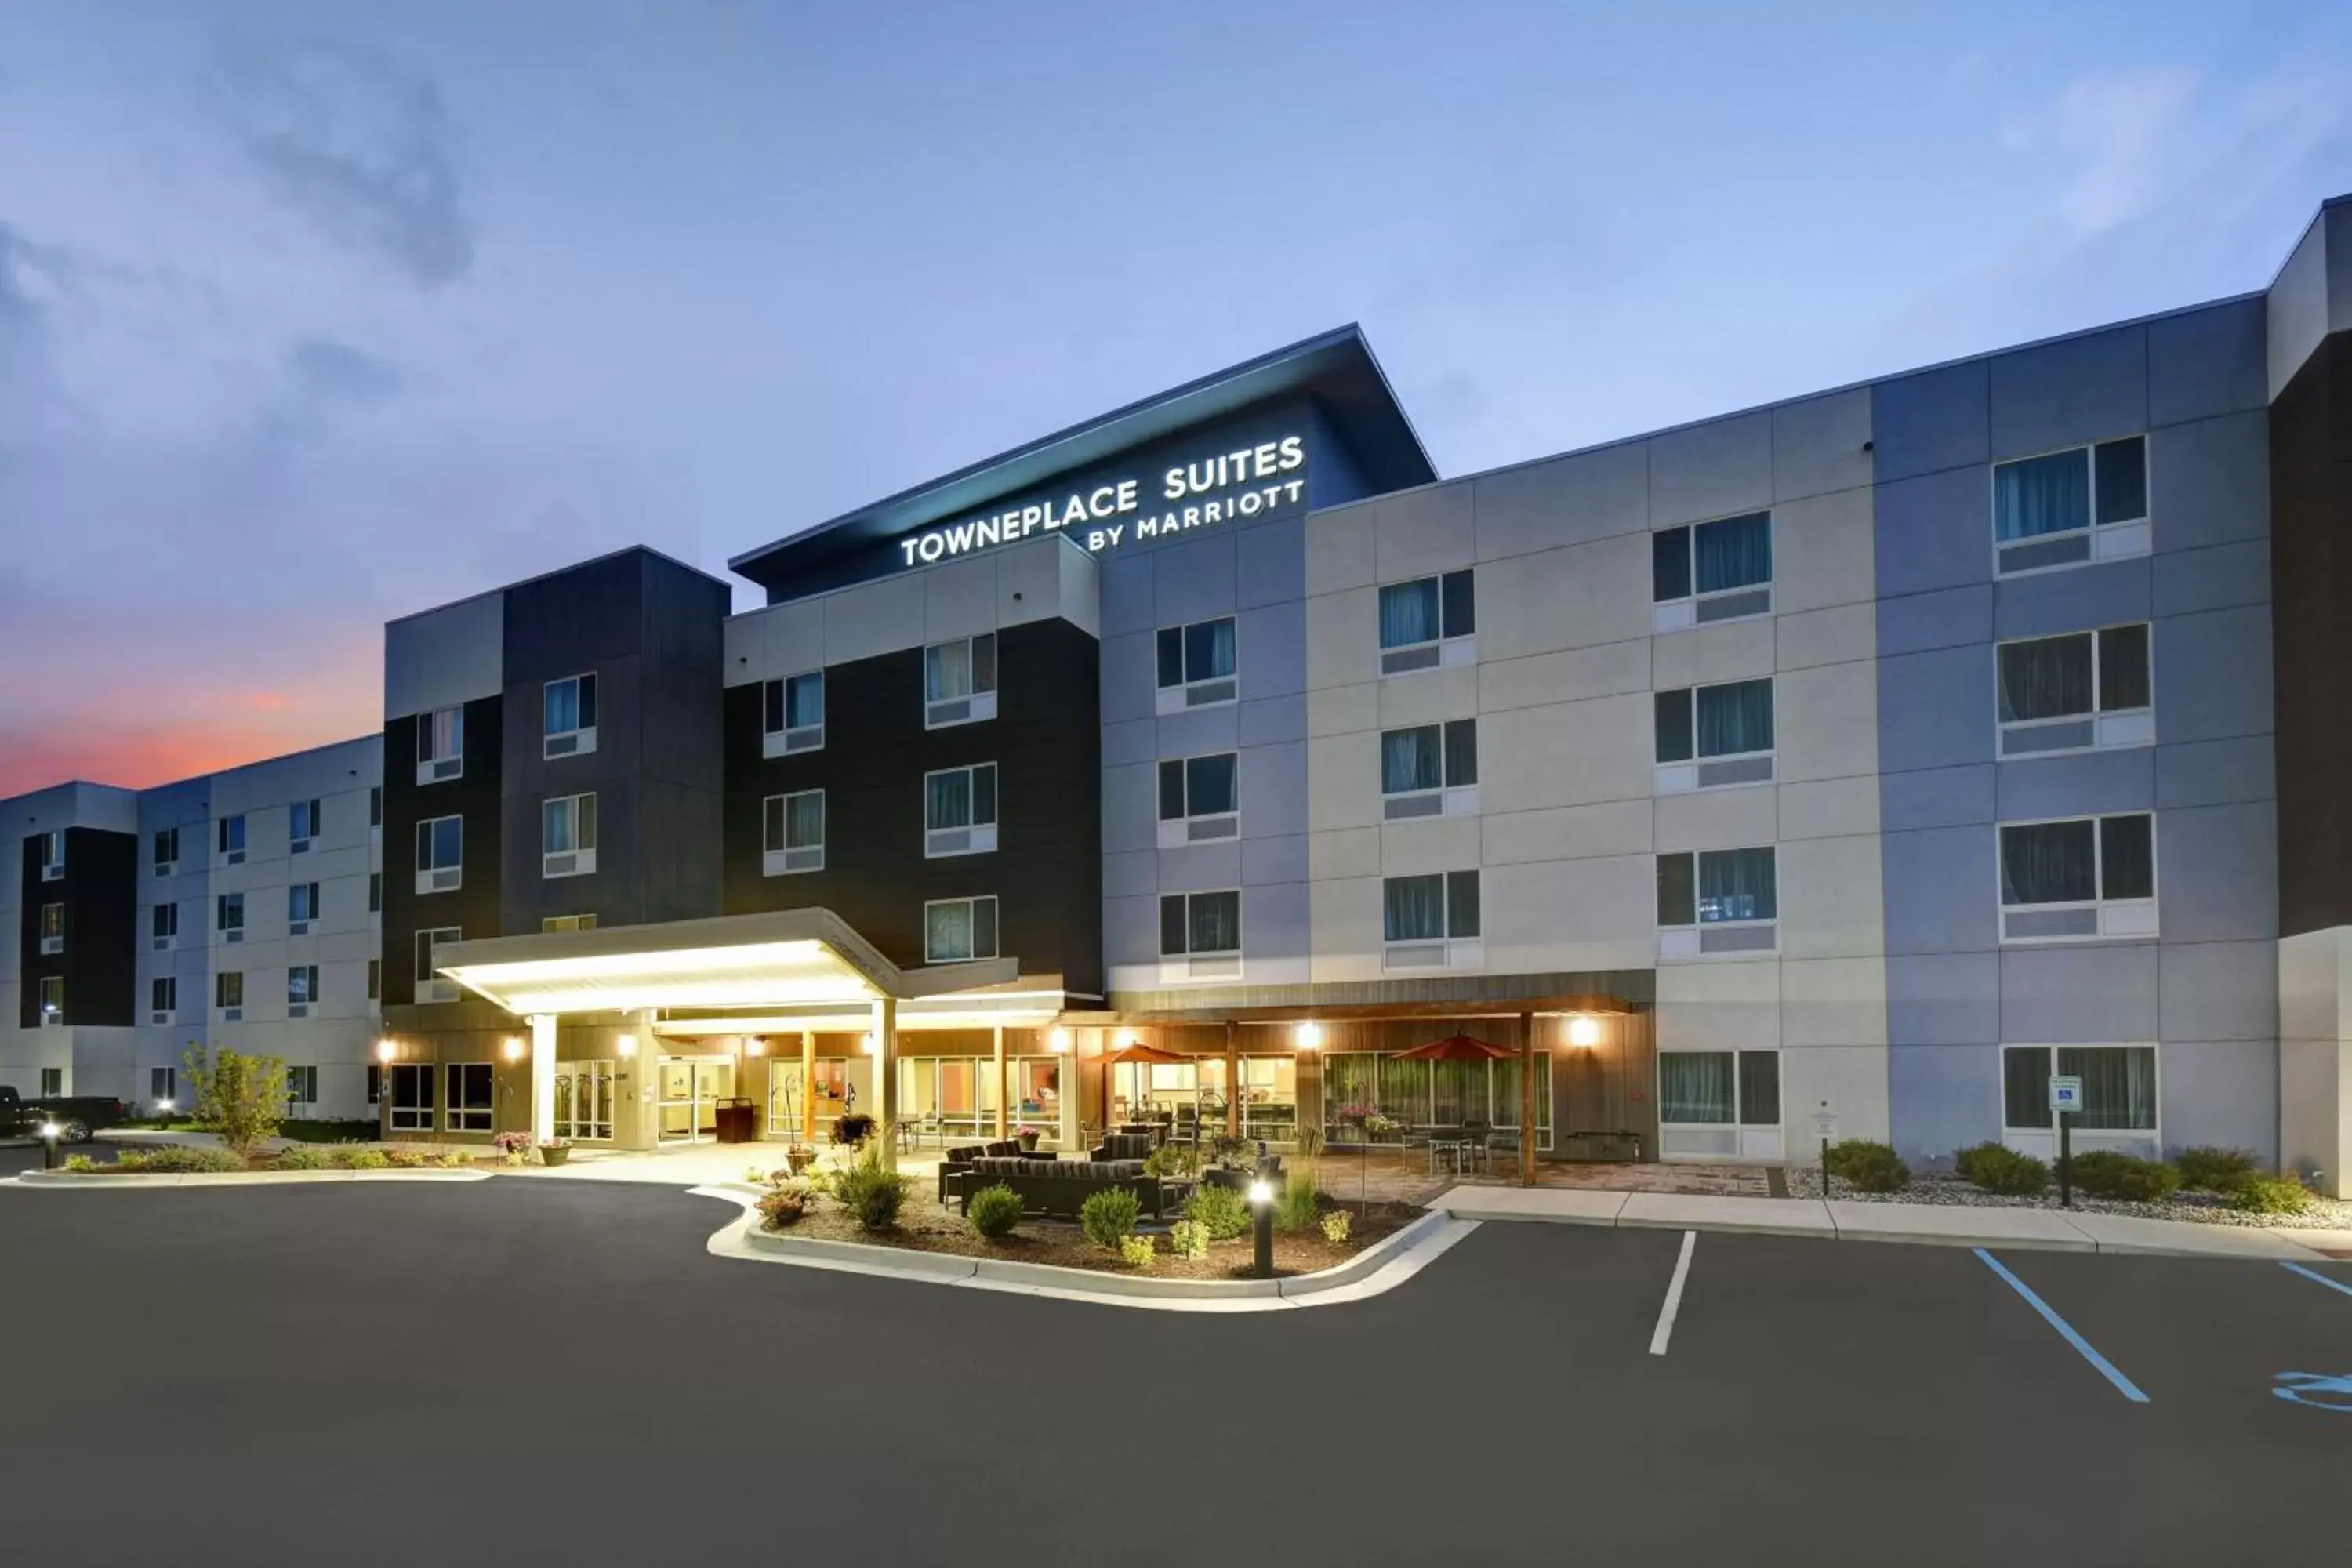 Property Building in TownePlace Suites by Marriott Grand Rapids Wyoming